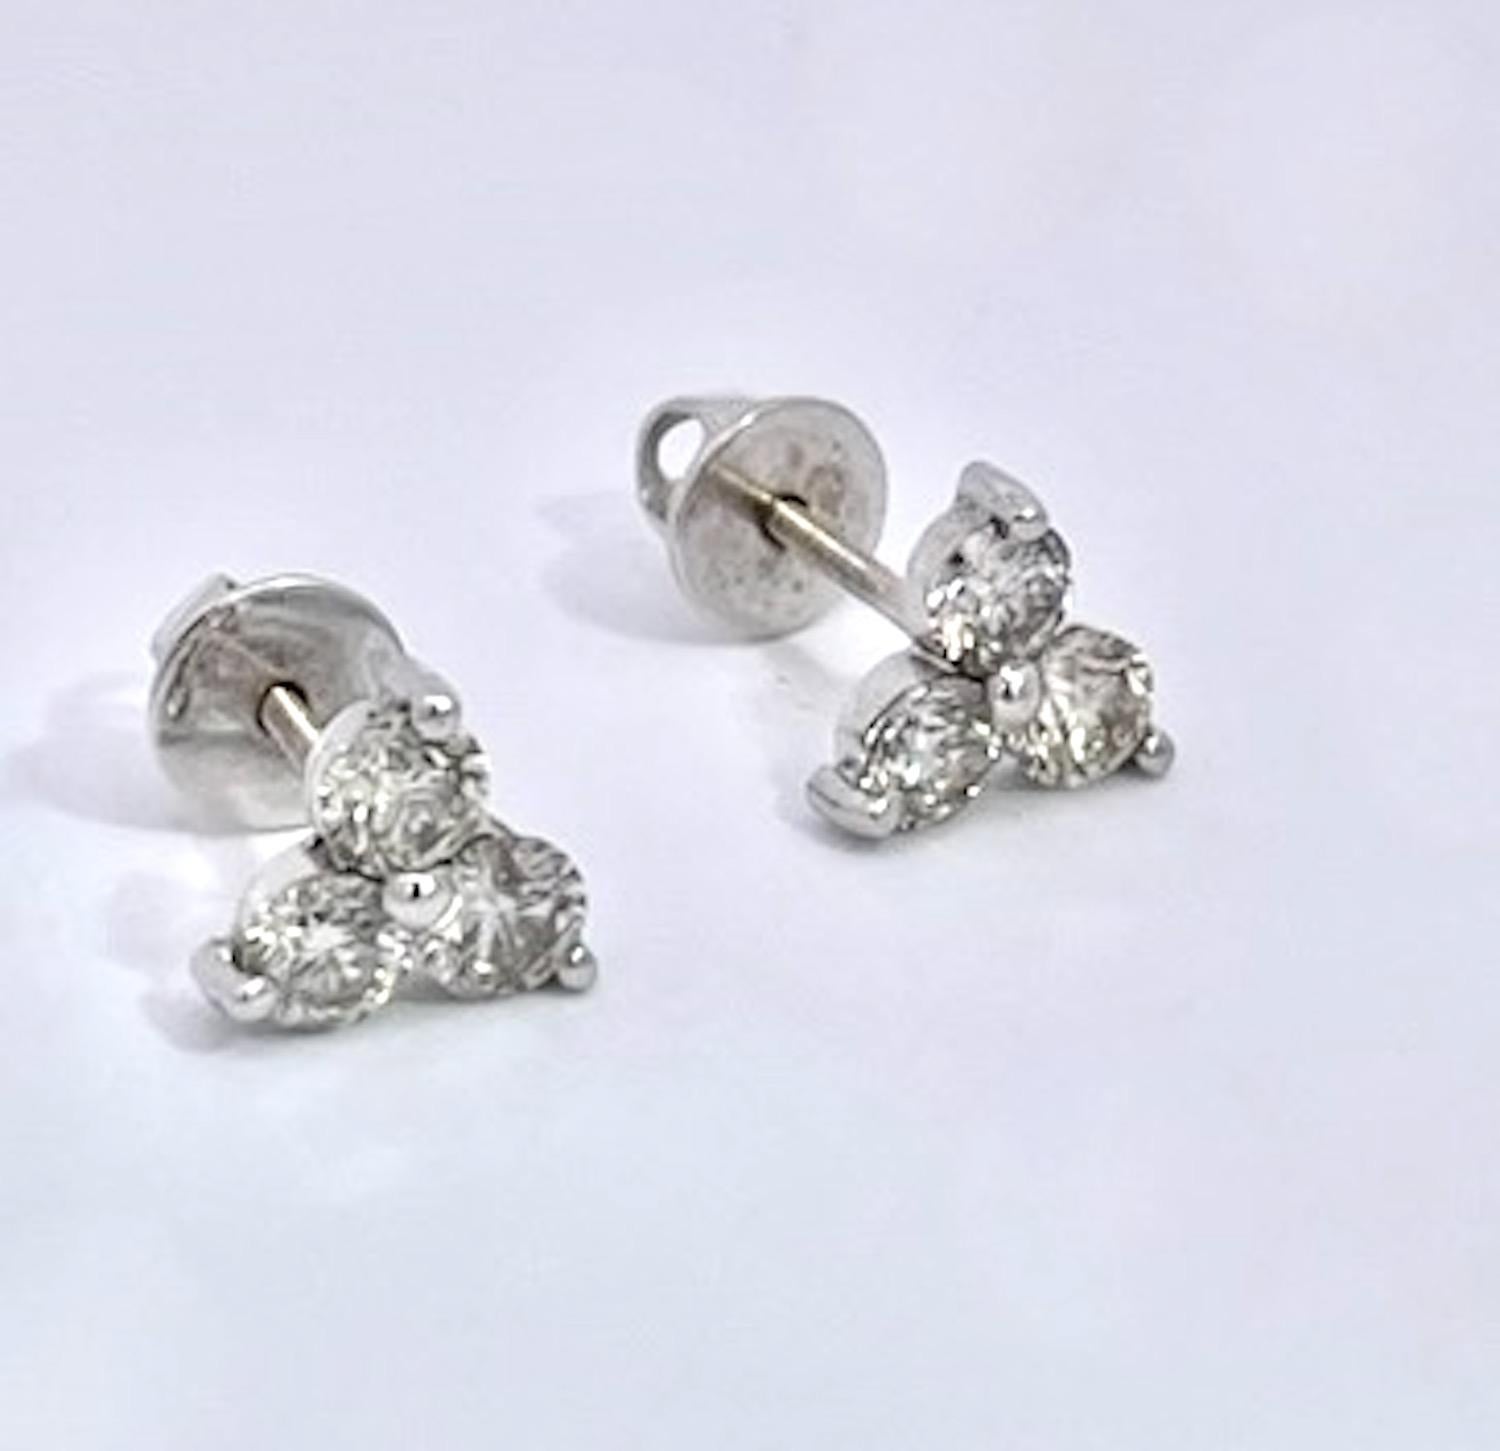 I had these earrings made about 7 years ago and just loved them as I could travel wearing them and not take them off during my trip.  These earrings consist of 3 modern cut Diamonds of approximately 0.25 points each for a total of 0.75 carats each